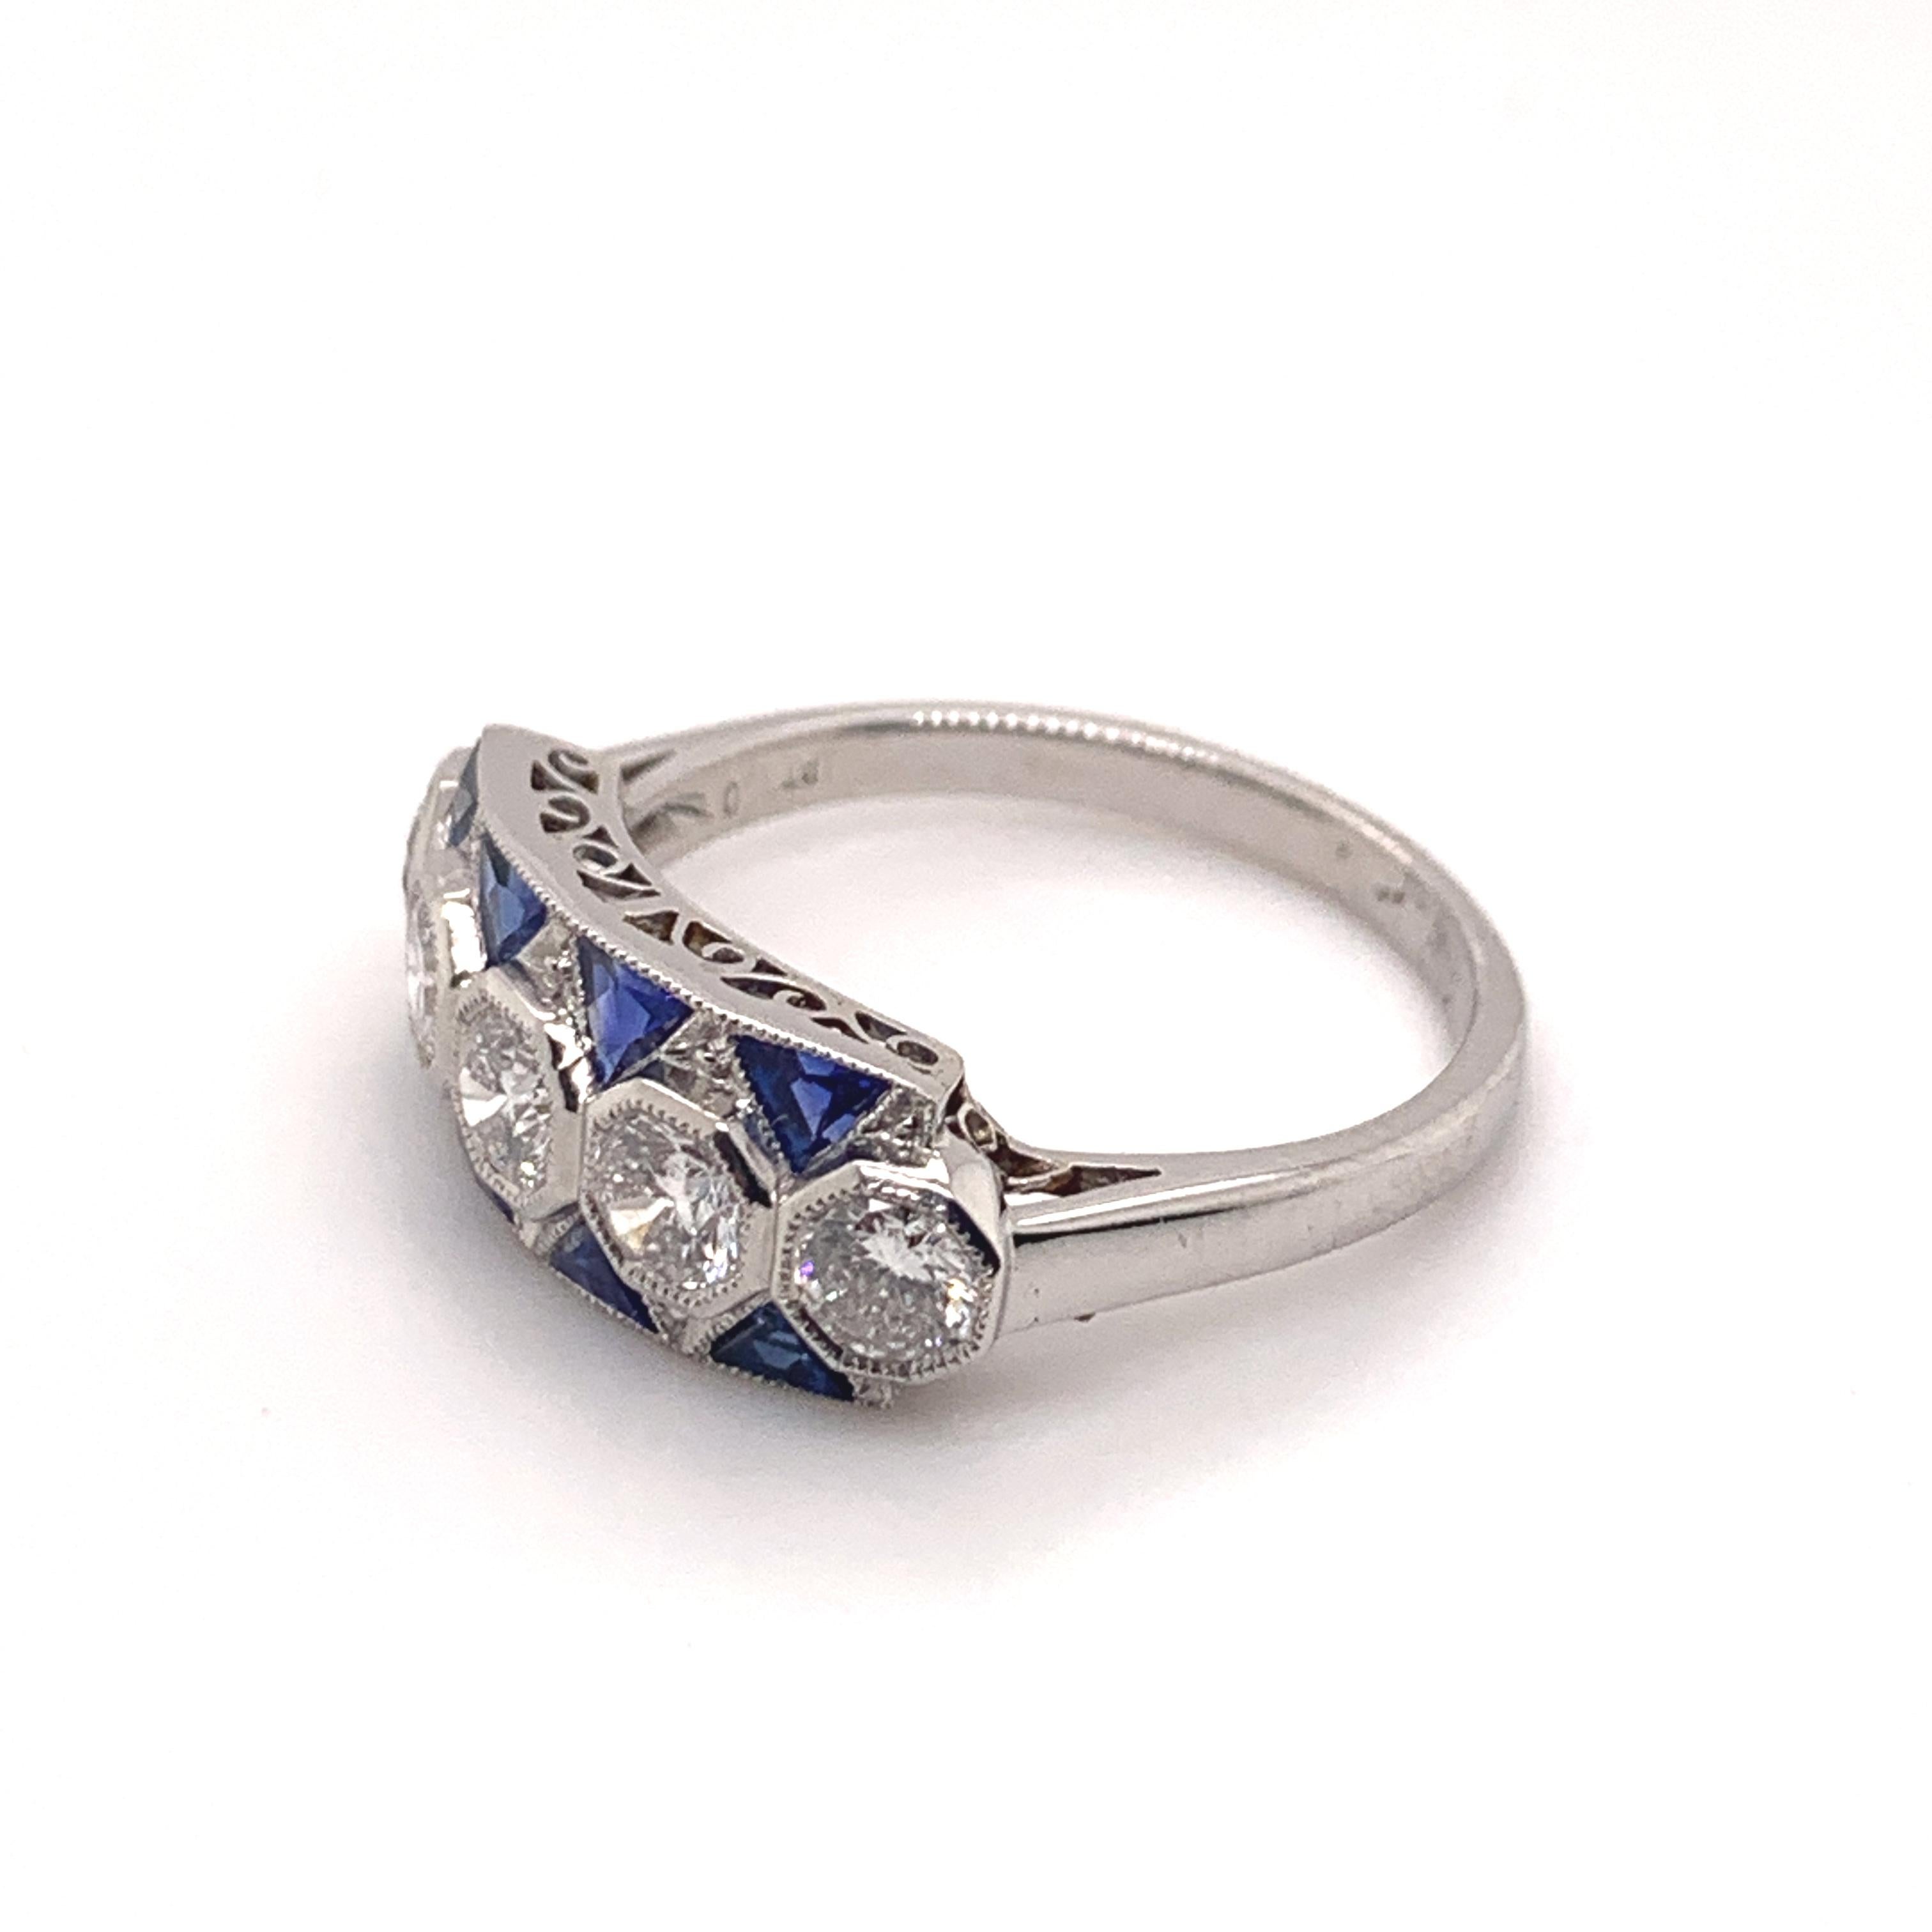 Sophia D. art deco ring set in platinum with 5 round diamonds with a total weight of 2.06 carats accentuated with 0.97 carats of blue sapphires.

Sophia D by Joseph Dardashti LTD has been known worldwide for 35 years and are inspired by classic Art